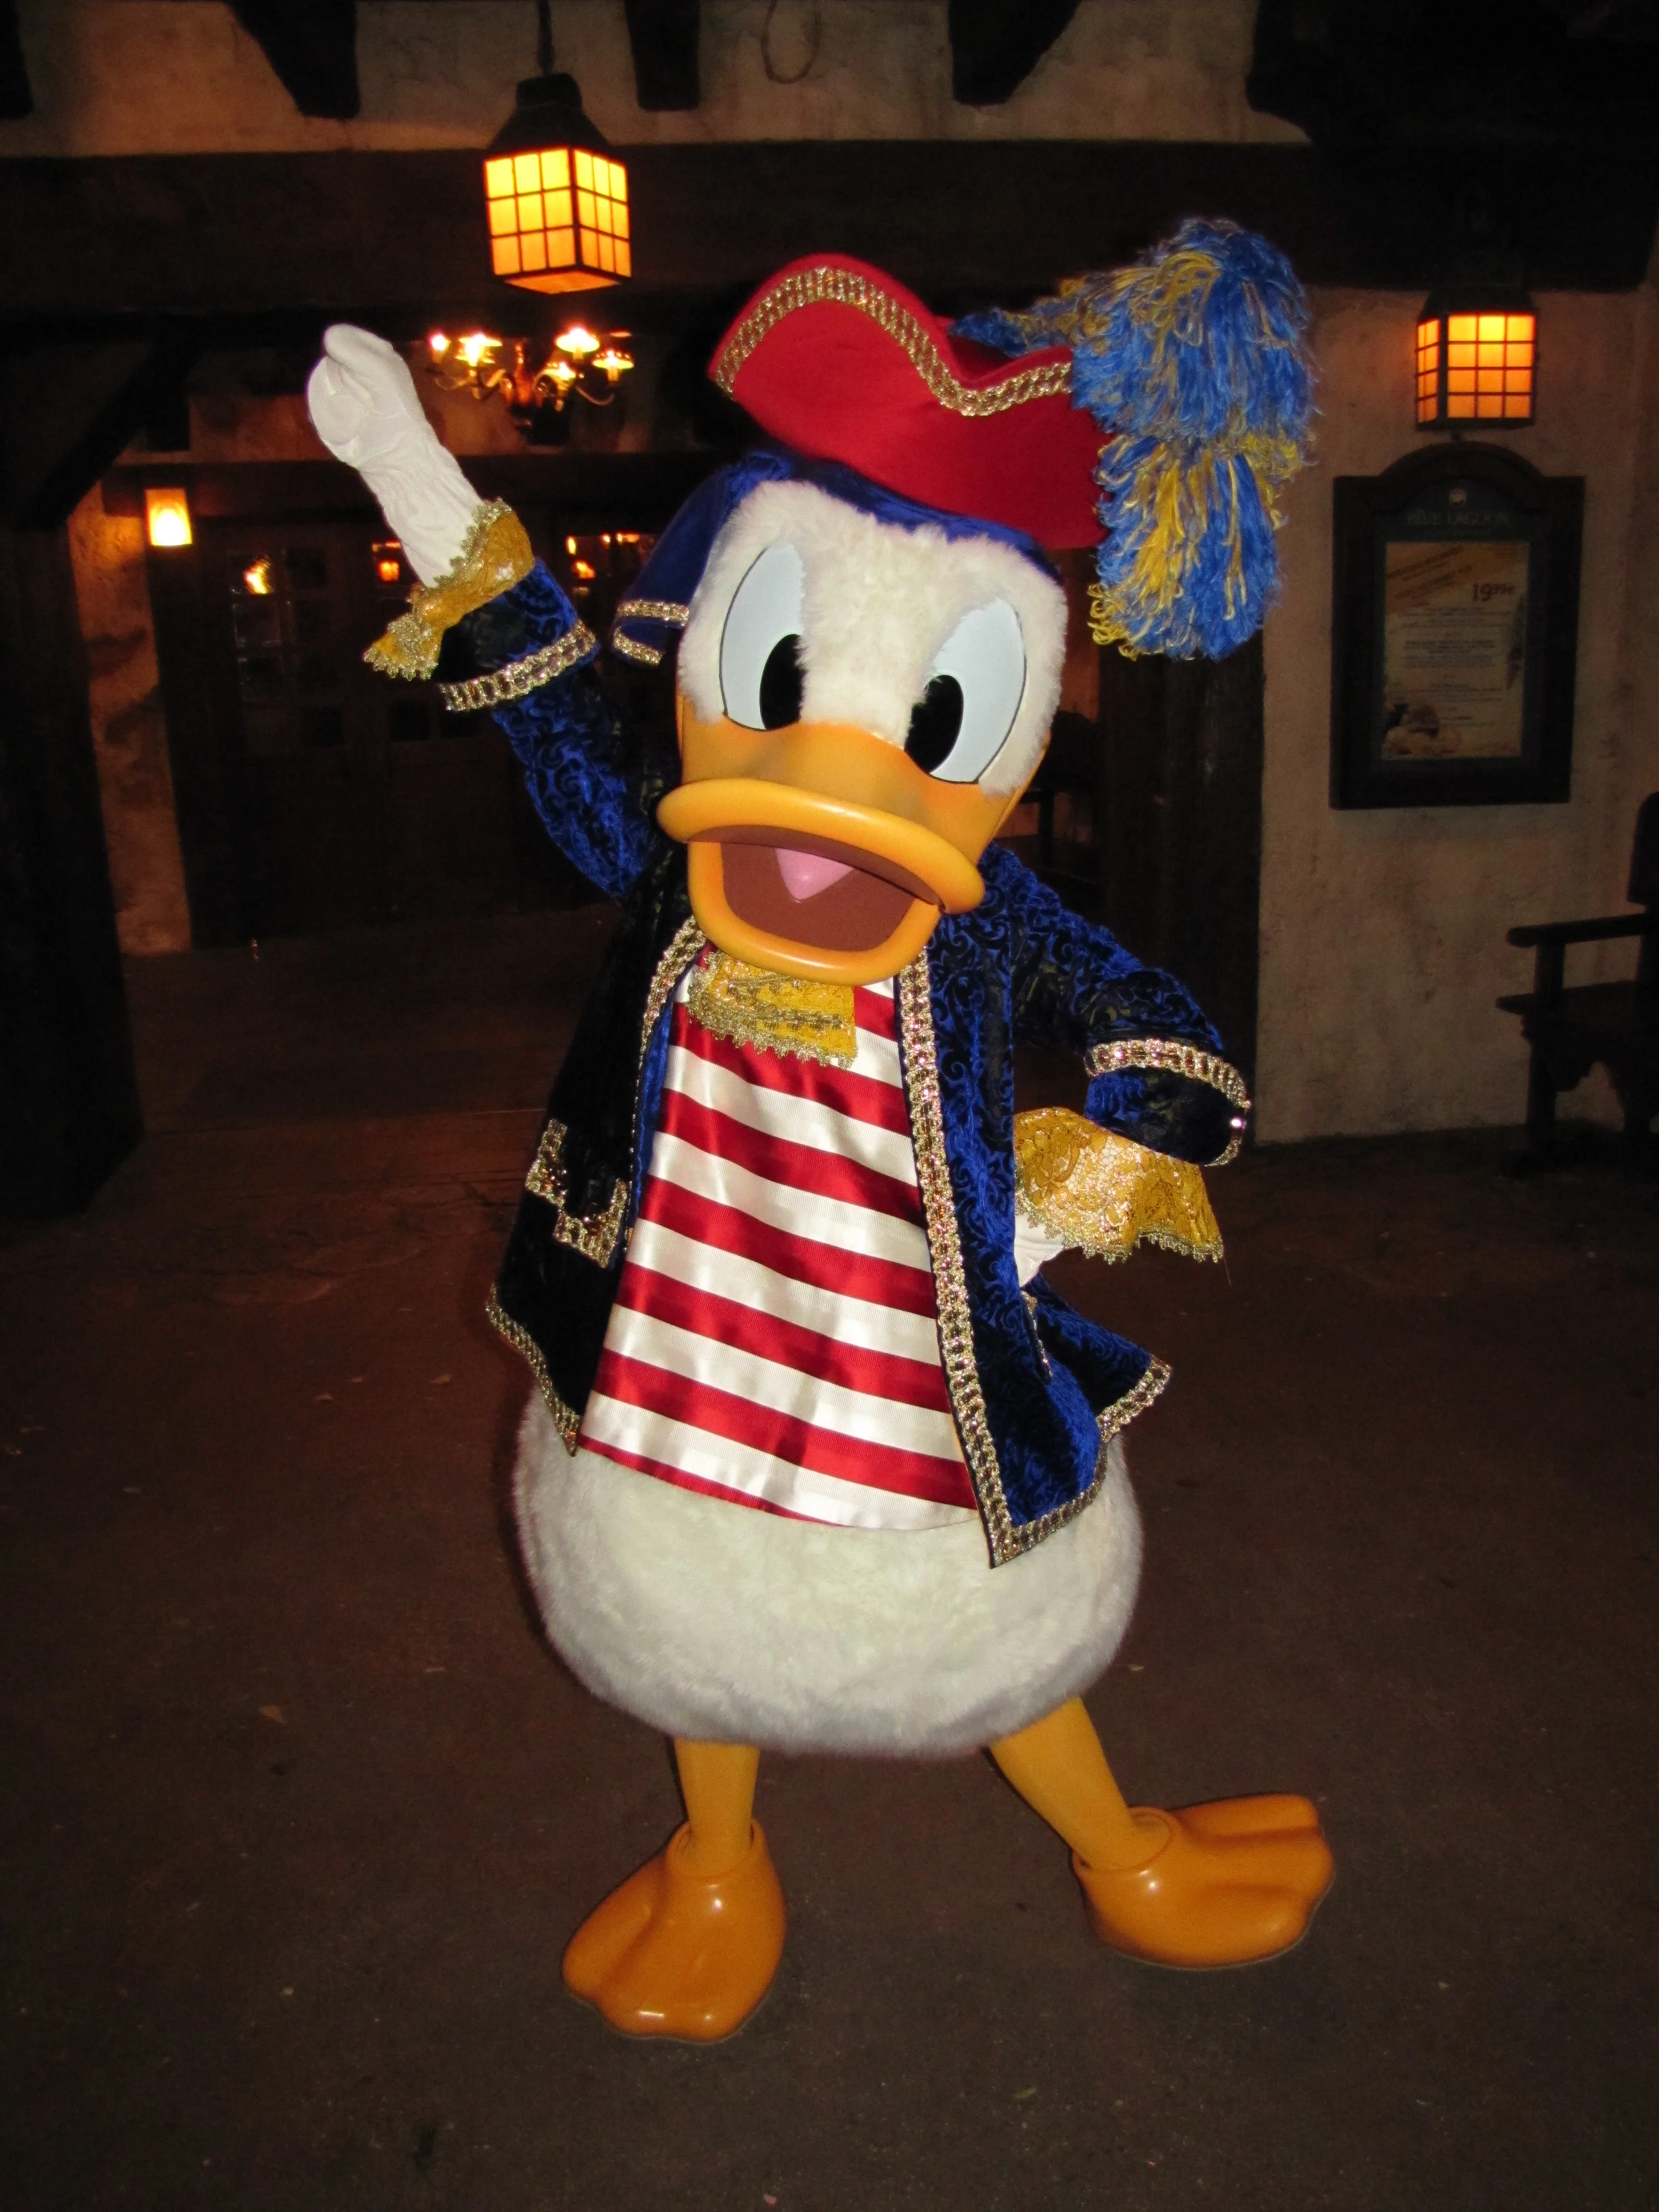 During the Mickey's Not So Scary Halloween Party of 2011 Donald was meeting guests wearing his Pirate outfit. A year later this outfit was modified and used again during a special Halloween version of the Character Express on October 31st.